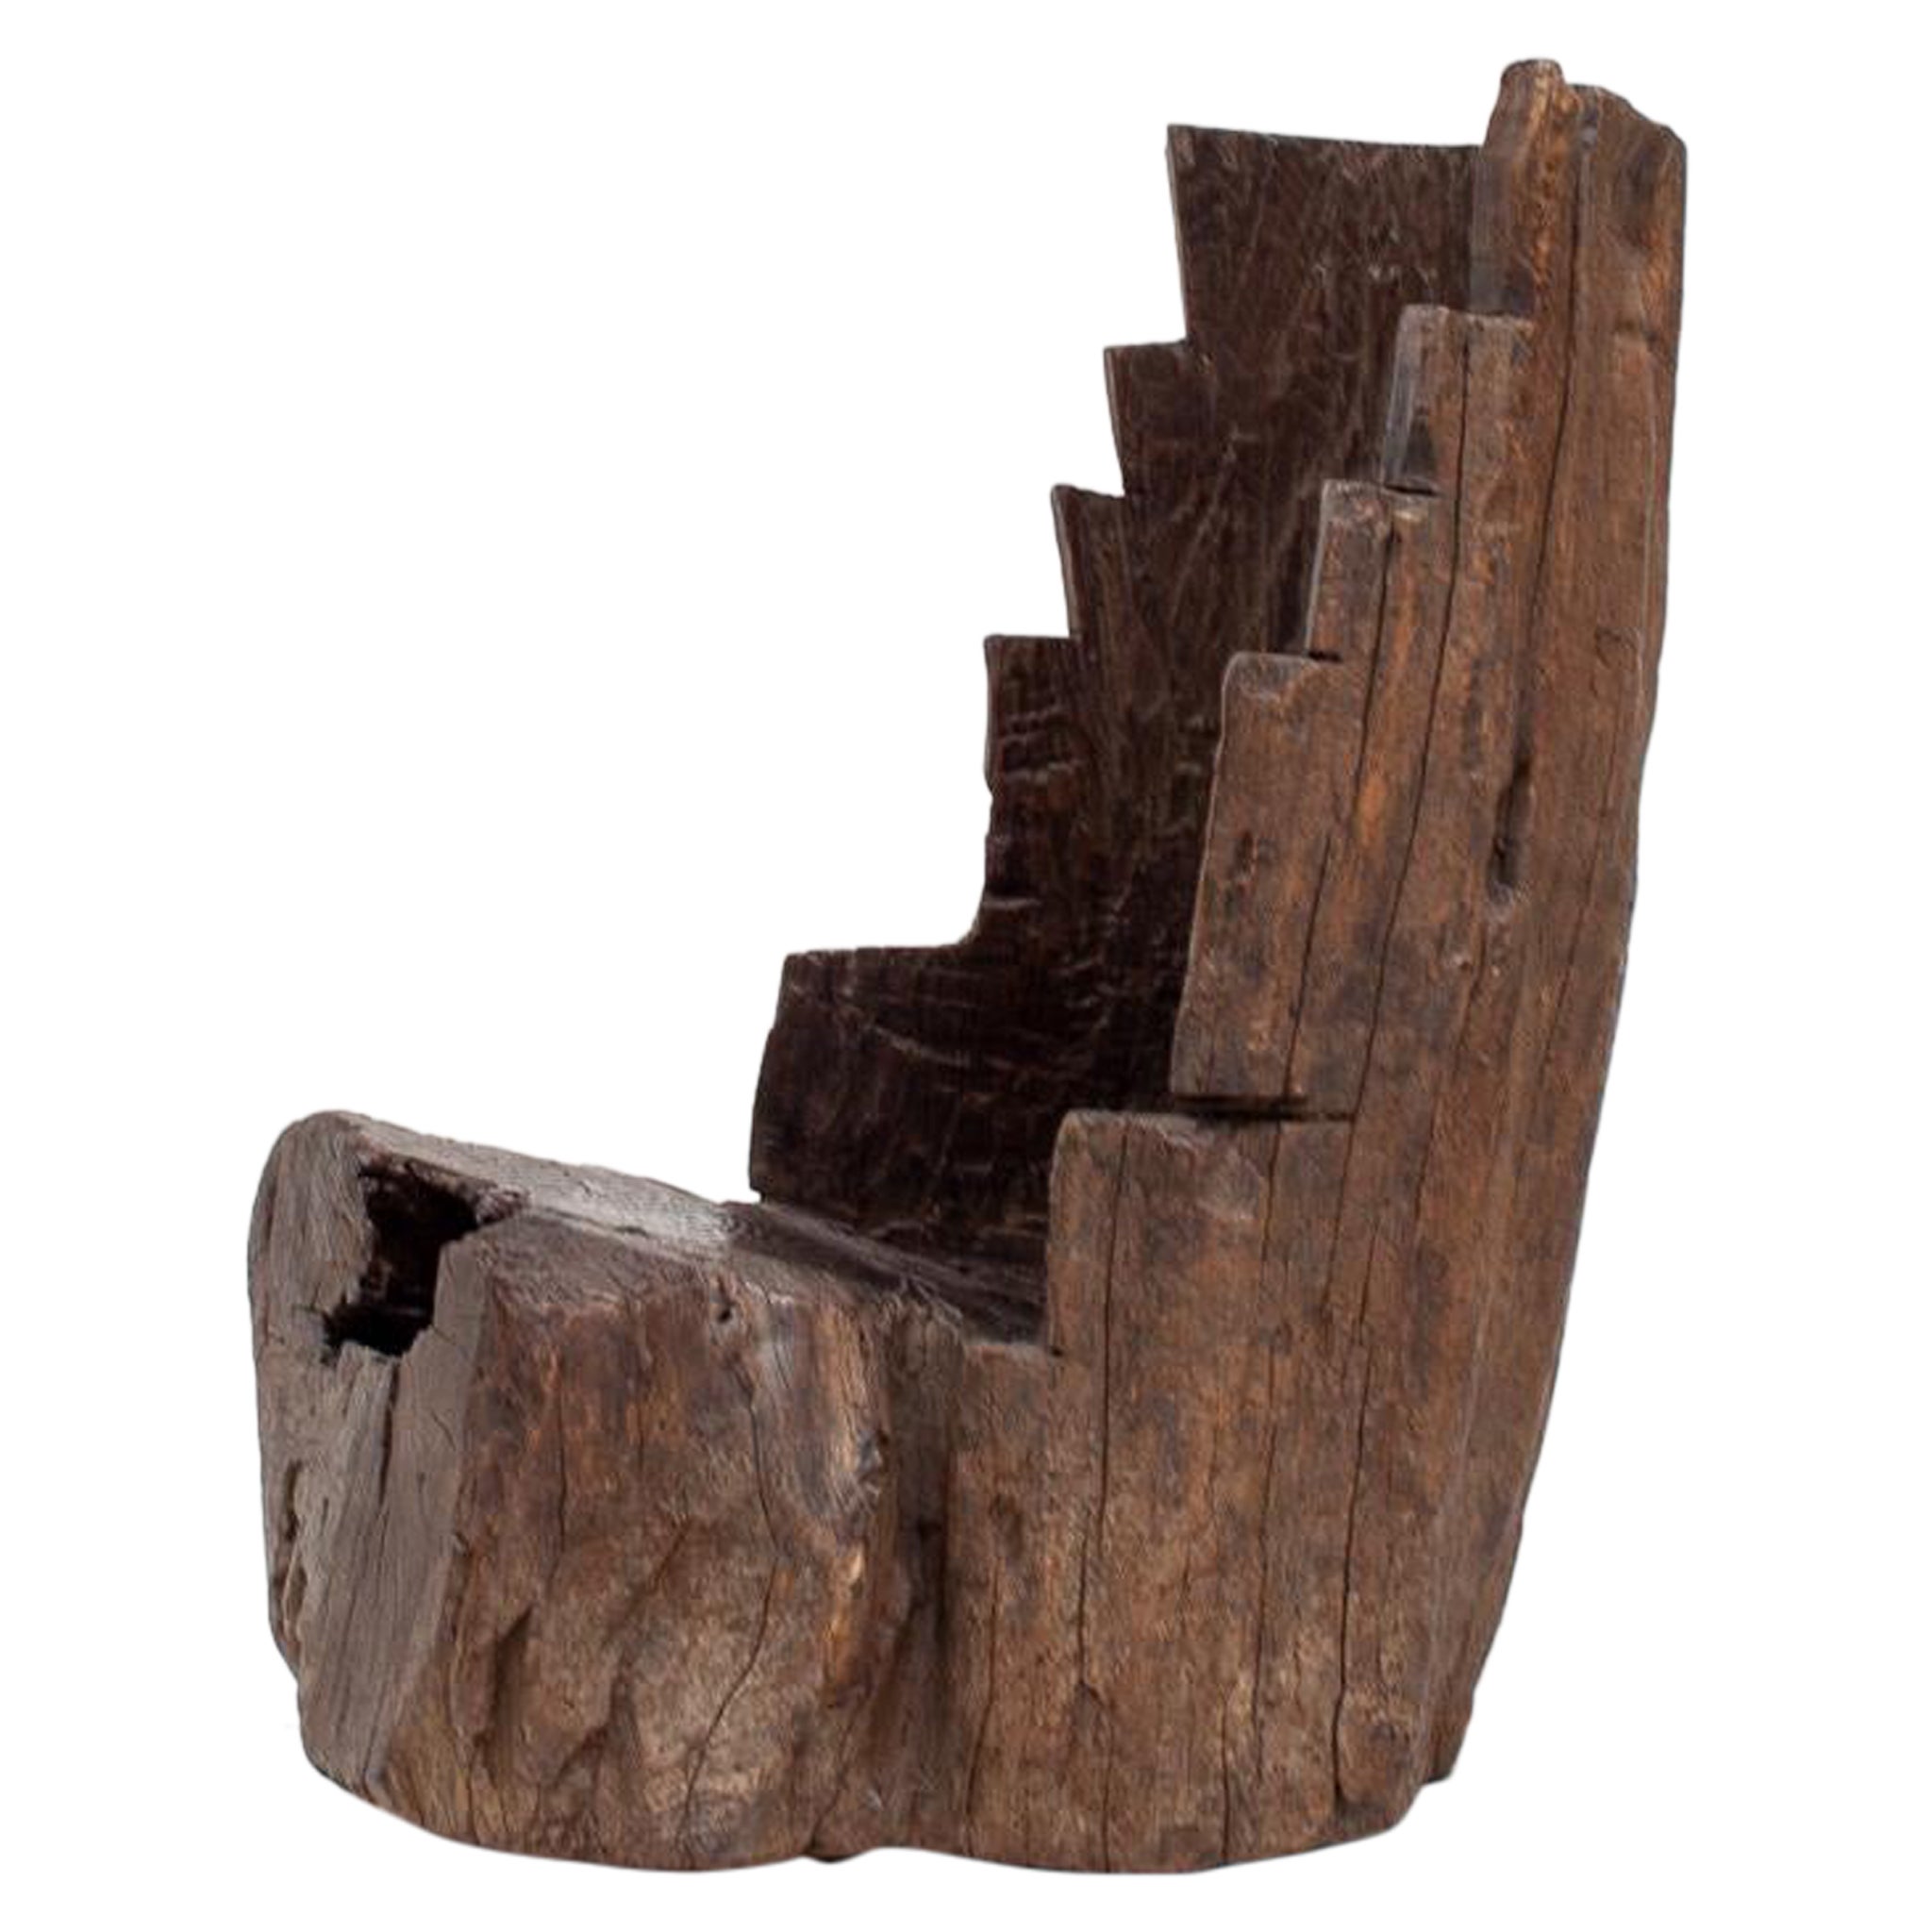 A Dug-out Carved Rustic Primitive Tree Trunk Fireside Chair Formed of Elm, c1800 For Sale